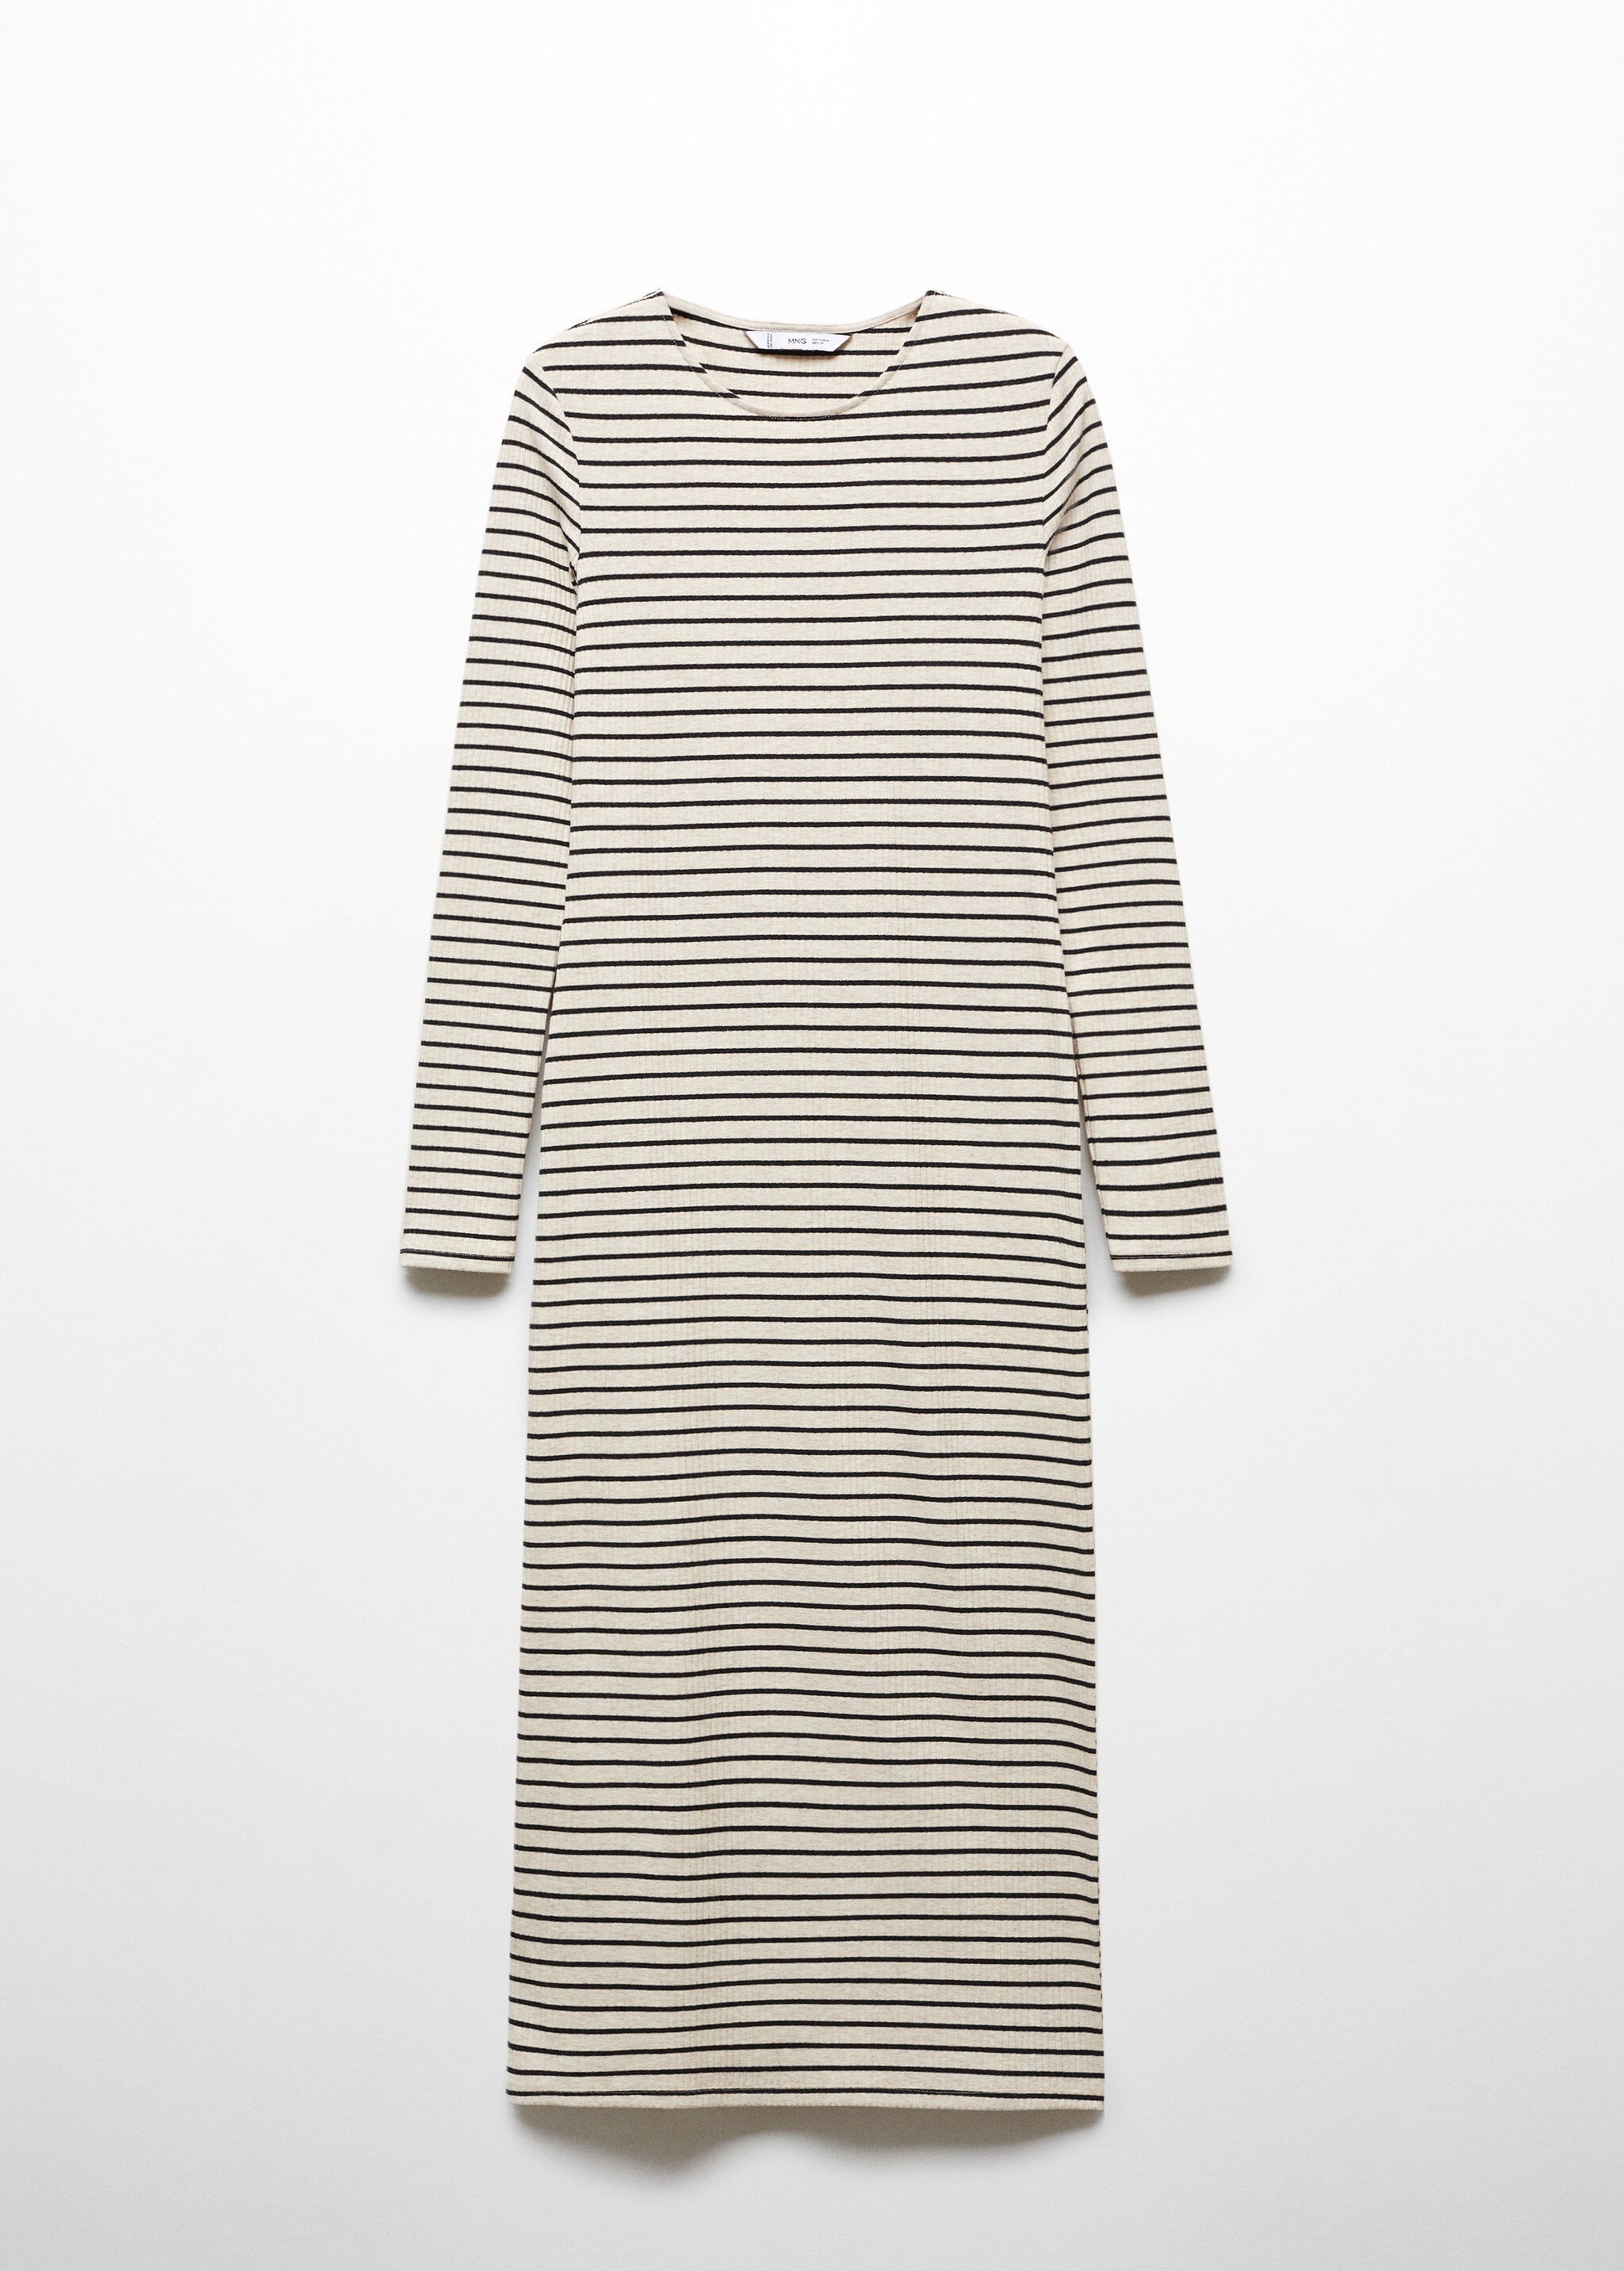 Striped ribbed dress - Article without model